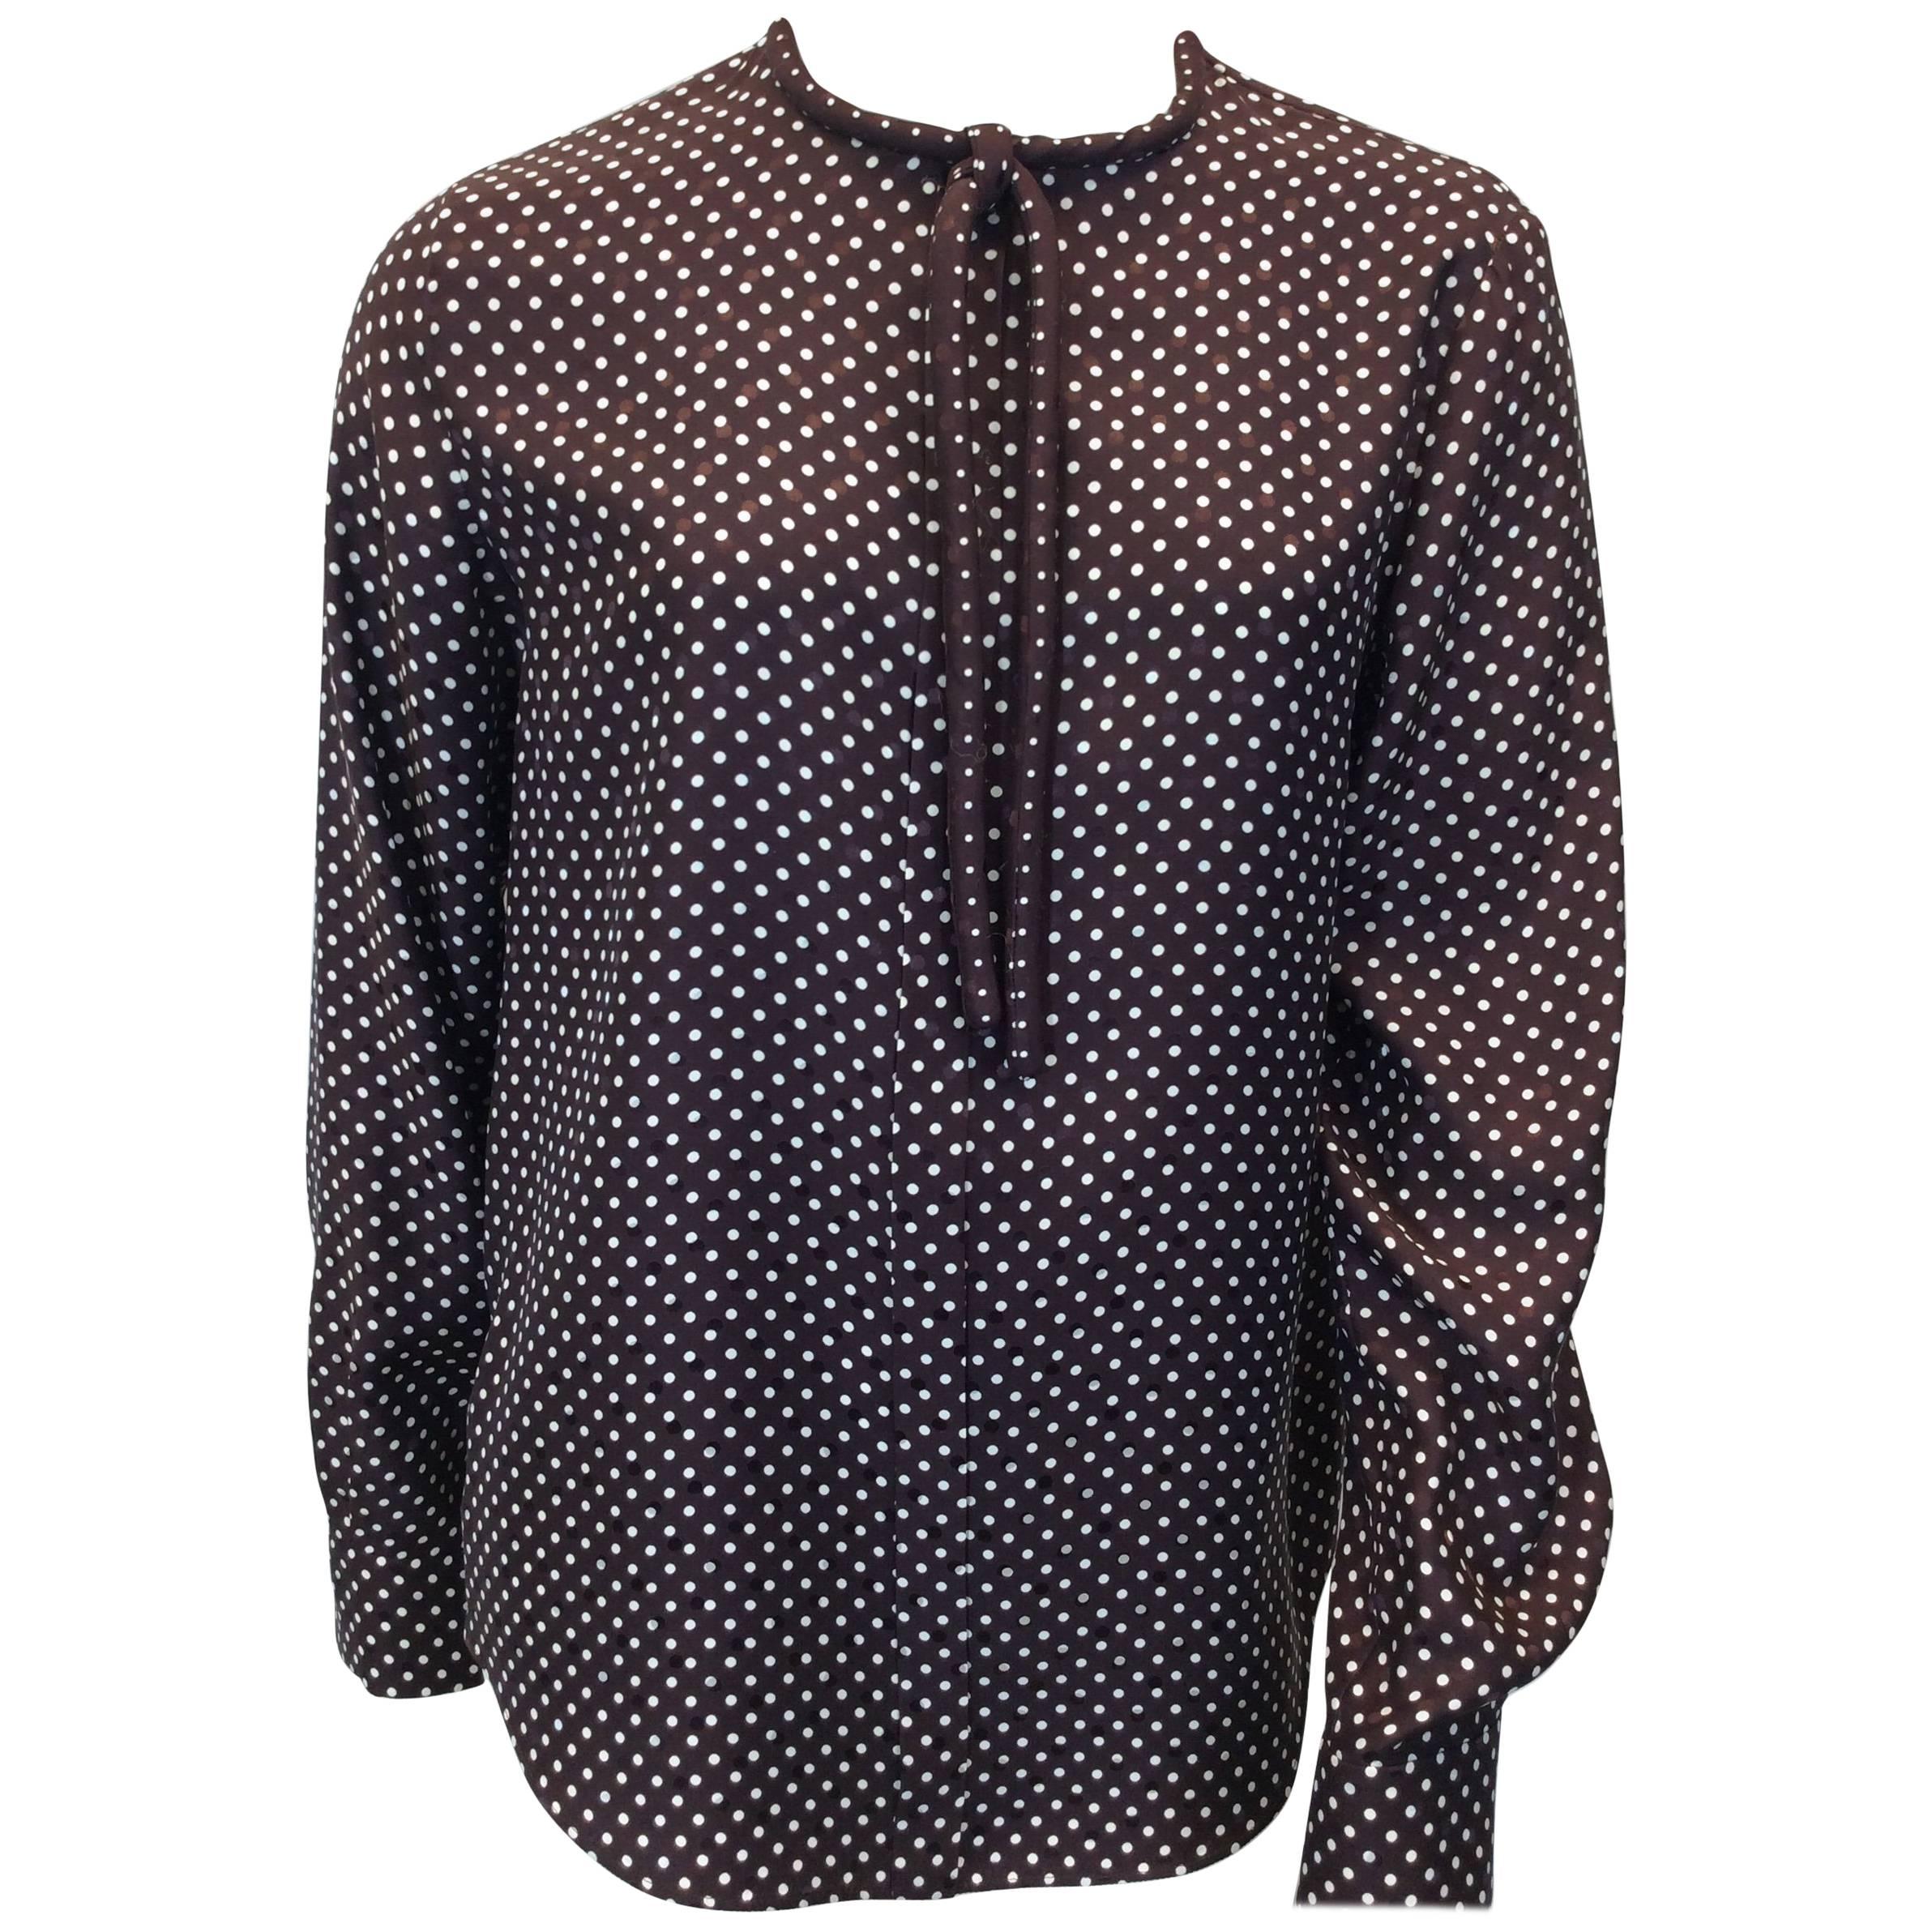 Chloe Brown Polka Dot Blouse with Neck Tie For Sale